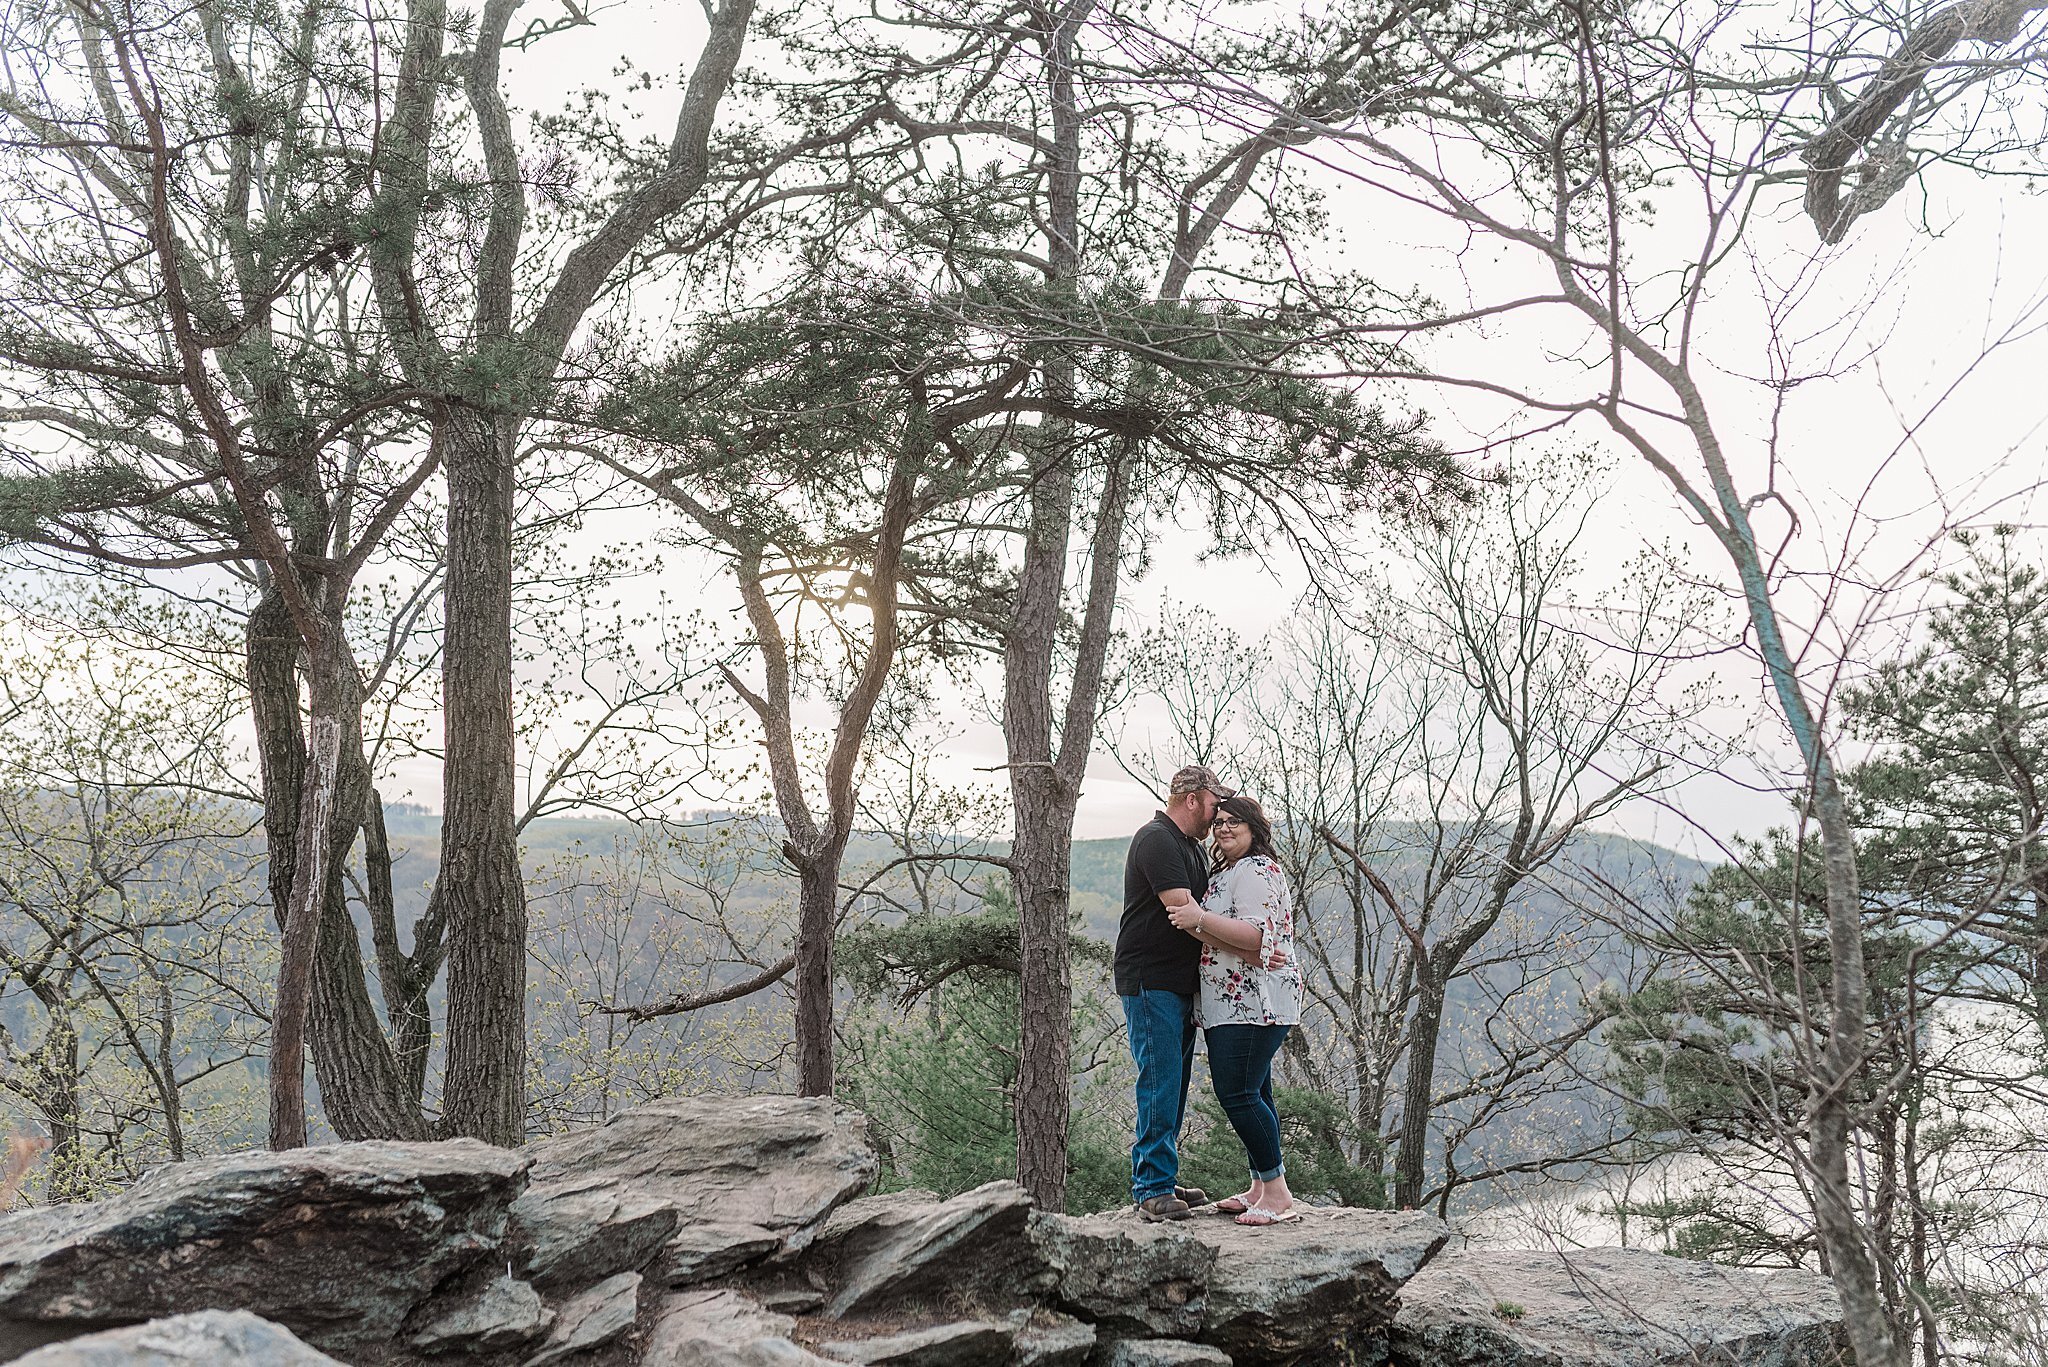 Pinnacle Overlook Holtwood PA Spring Engagement Session 